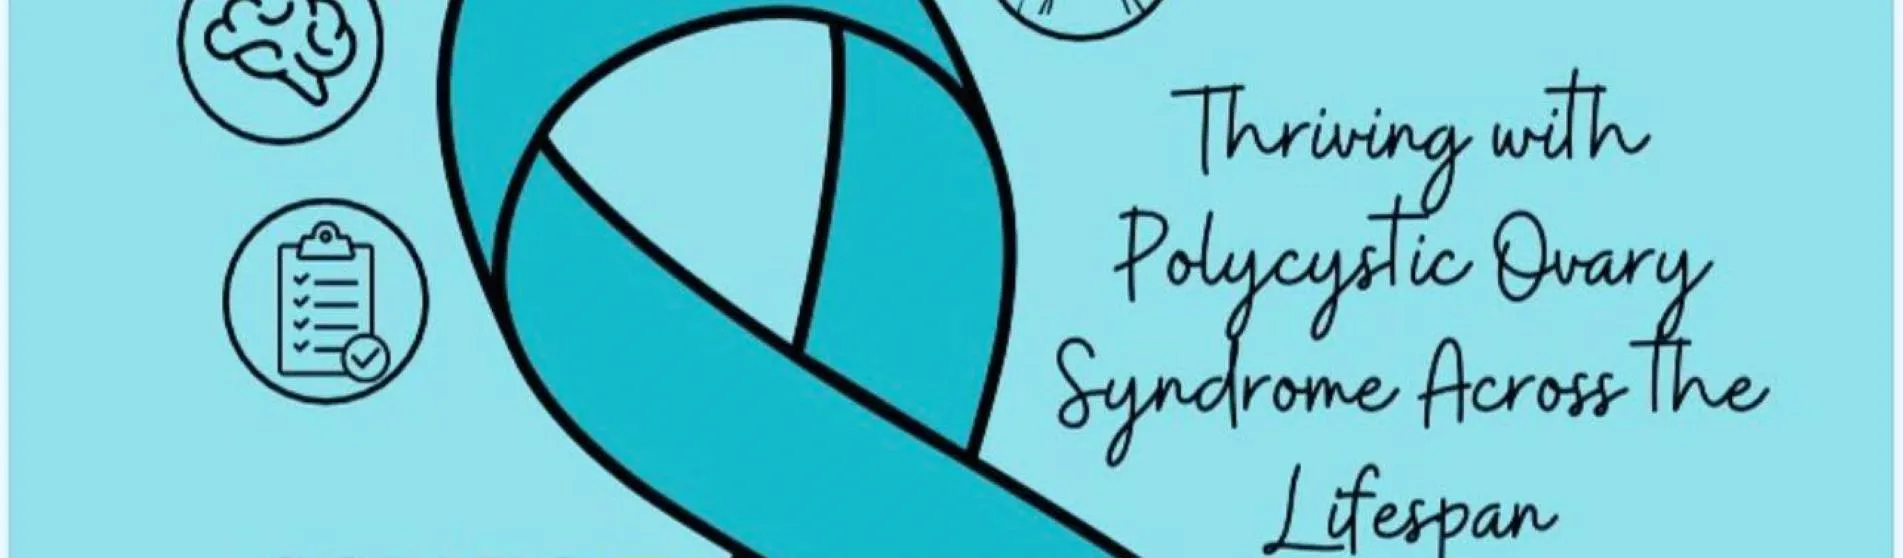 Banner, Thriving with Polycystic Ovary Syndrome (PCOS) across the Lifespan